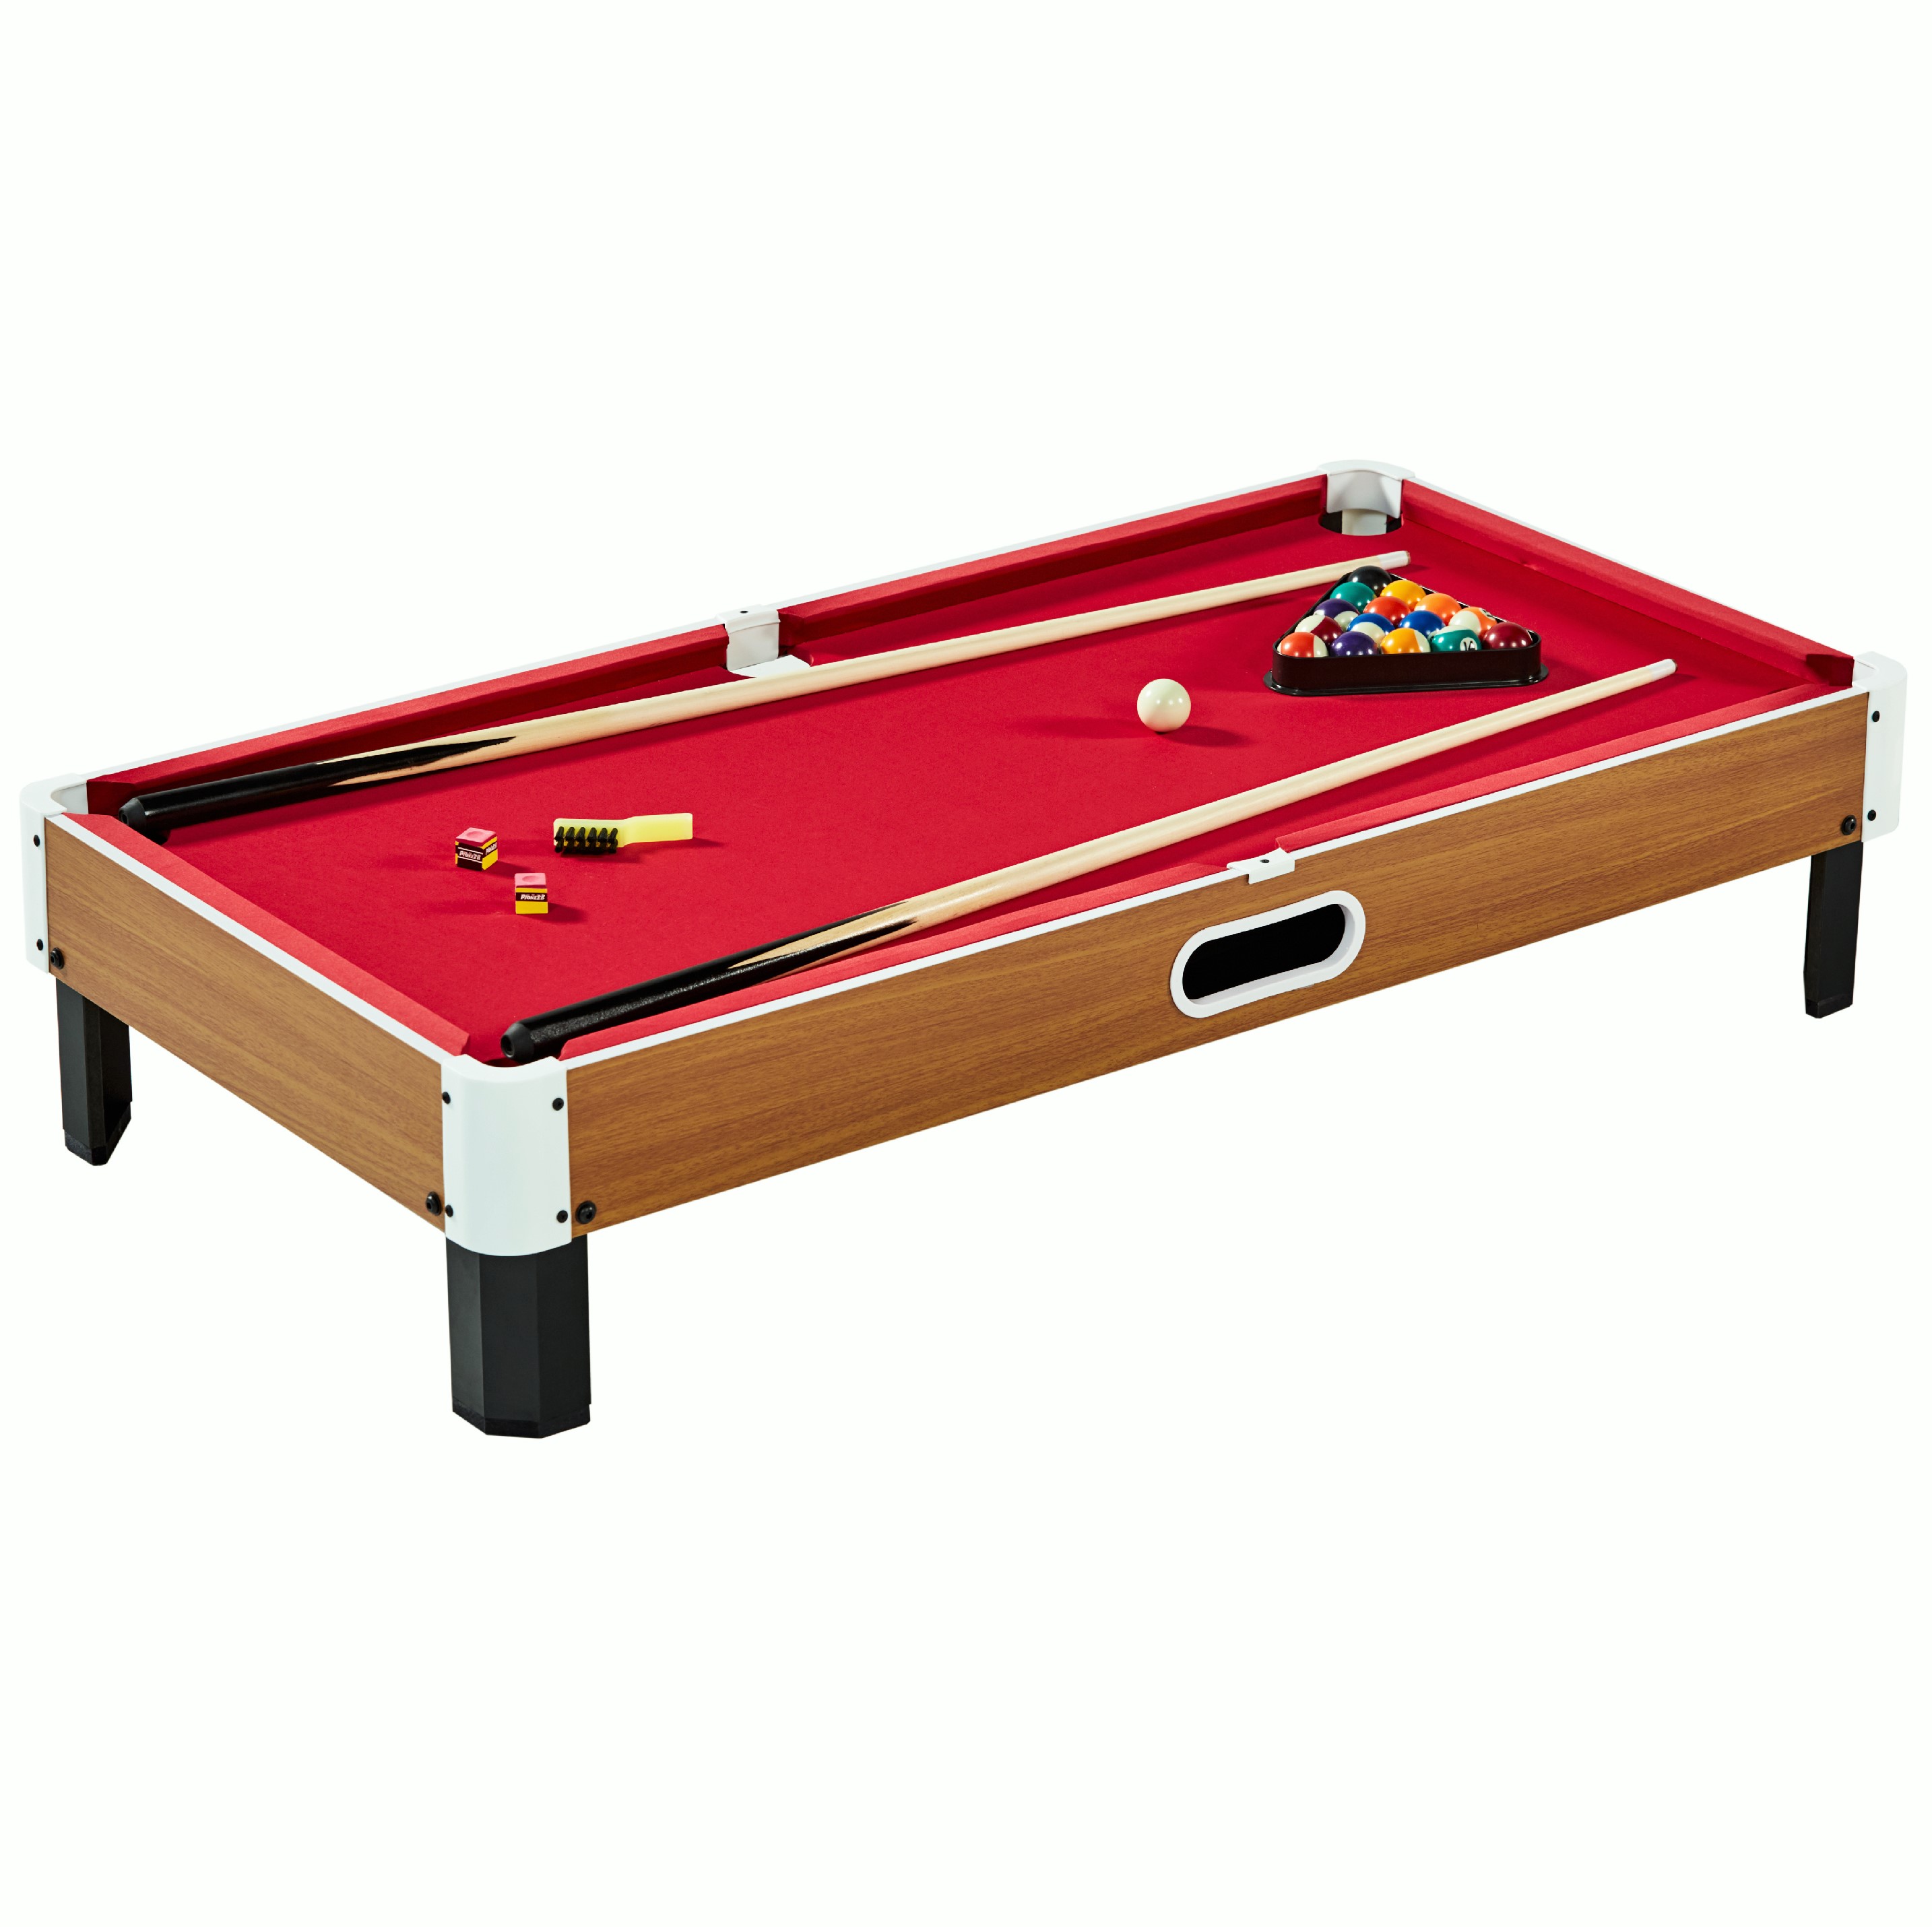 MD Sports Largest 48″ Tabletop Billiard Pool Table, 4 Feet Compact Size Table Top